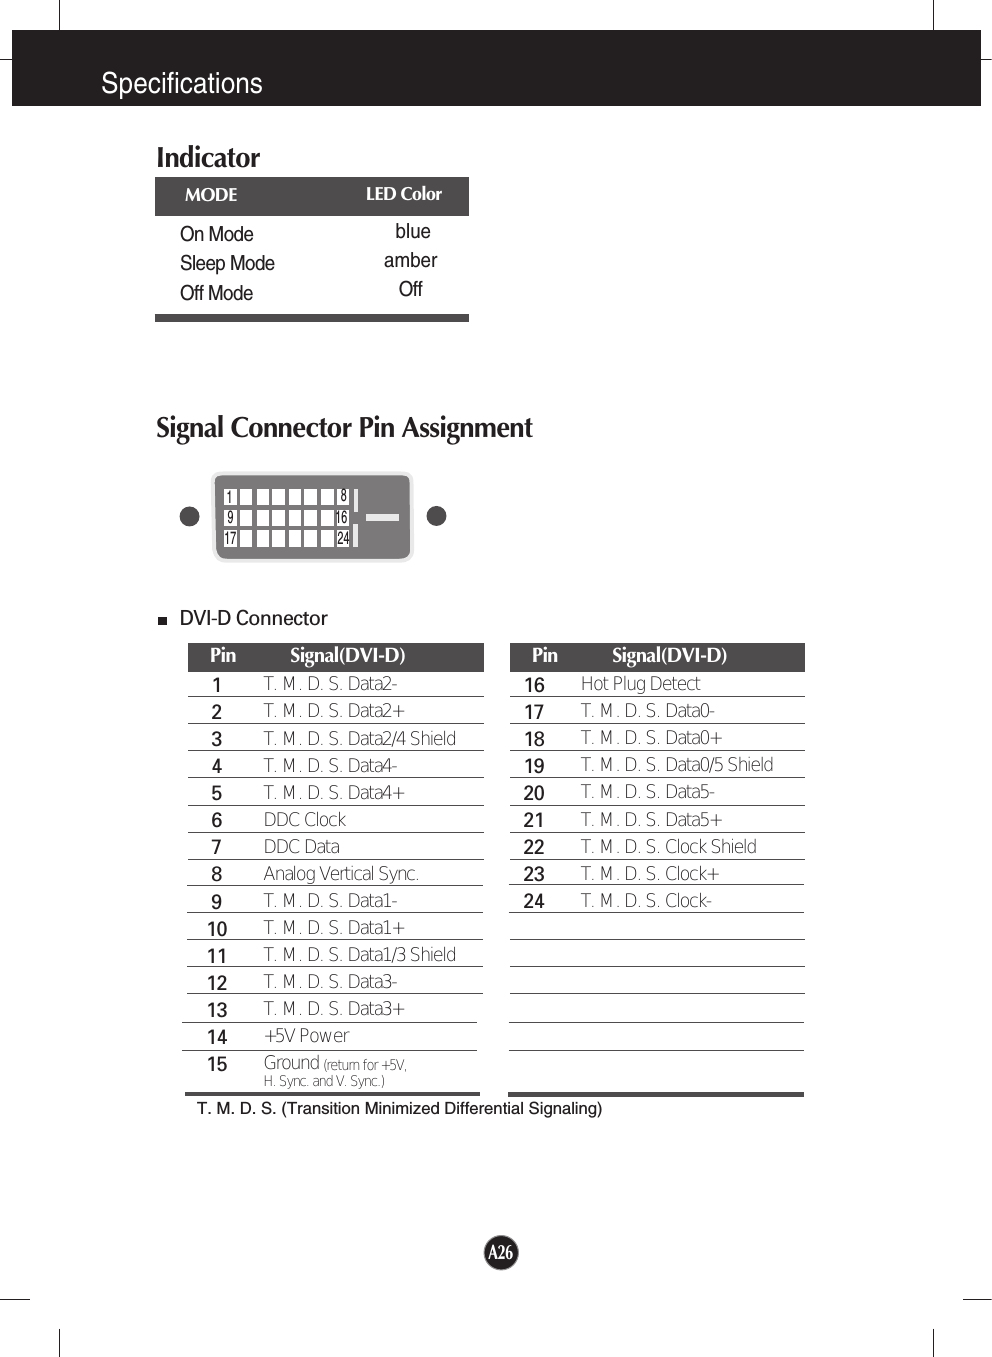 Signal Connector Pin Assignment18917 2416Pin           Signal(DVI-D)123456789101112131415T. M. D. S. Data2-T. M. D. S. Data2+T. M. D. S. Data2/4 ShieldT. M. D. S. Data4-T. M. D. S. Data4+DDC ClockDDC DataAnalog Vertical Sync.T. M. D. S. Data1-T. M. D. S. Data1+T. M. D. S. Data1/3 ShieldT. M. D. S. Data3-T. M. D. S. Data3++5V PowerGround (return for +5V, H. Sync. and V. Sync.)Pin           Signal(DVI-D)161718192021222324Hot Plug DetectT. M. D. S. Data0-T. M. D. S. Data0+T. M. D. S. Data0/5 ShieldT. M. D. S. Data5-T. M. D. S. Data5+T. M. D. S. Clock ShieldT. M. D. S. Clock+T. M. D. S. Clock-T. M. D. S. (Transition Minimized Differential Signaling)DVI-D Connector SpecificationsIndicatorOn ModeSleep ModeOff ModeblueamberOffLED ColorMODEA26